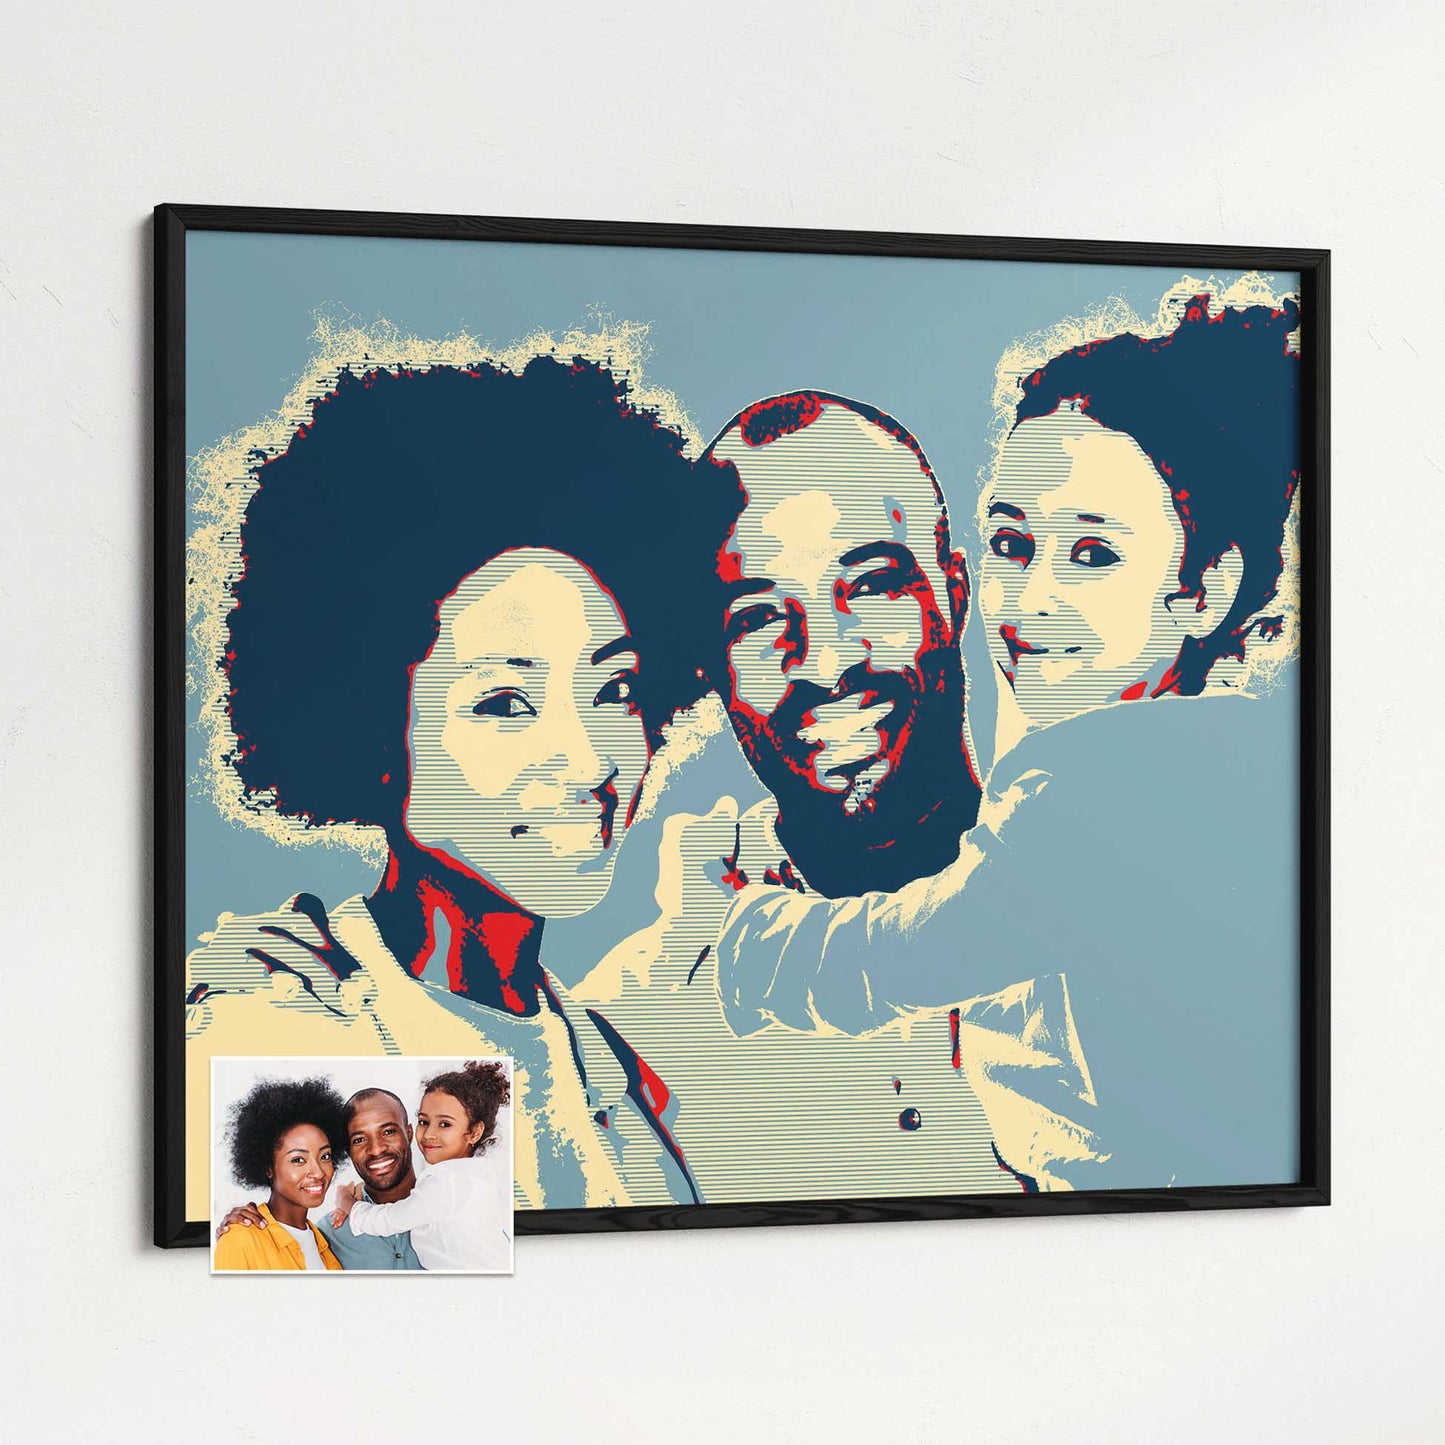 Celebrate special moments with a Personalised Election Poster Framed Print. This original and vibrant artwork, created from your photo, showcases a cool and sharp pop art effect that brings a modern and bold flair to any space